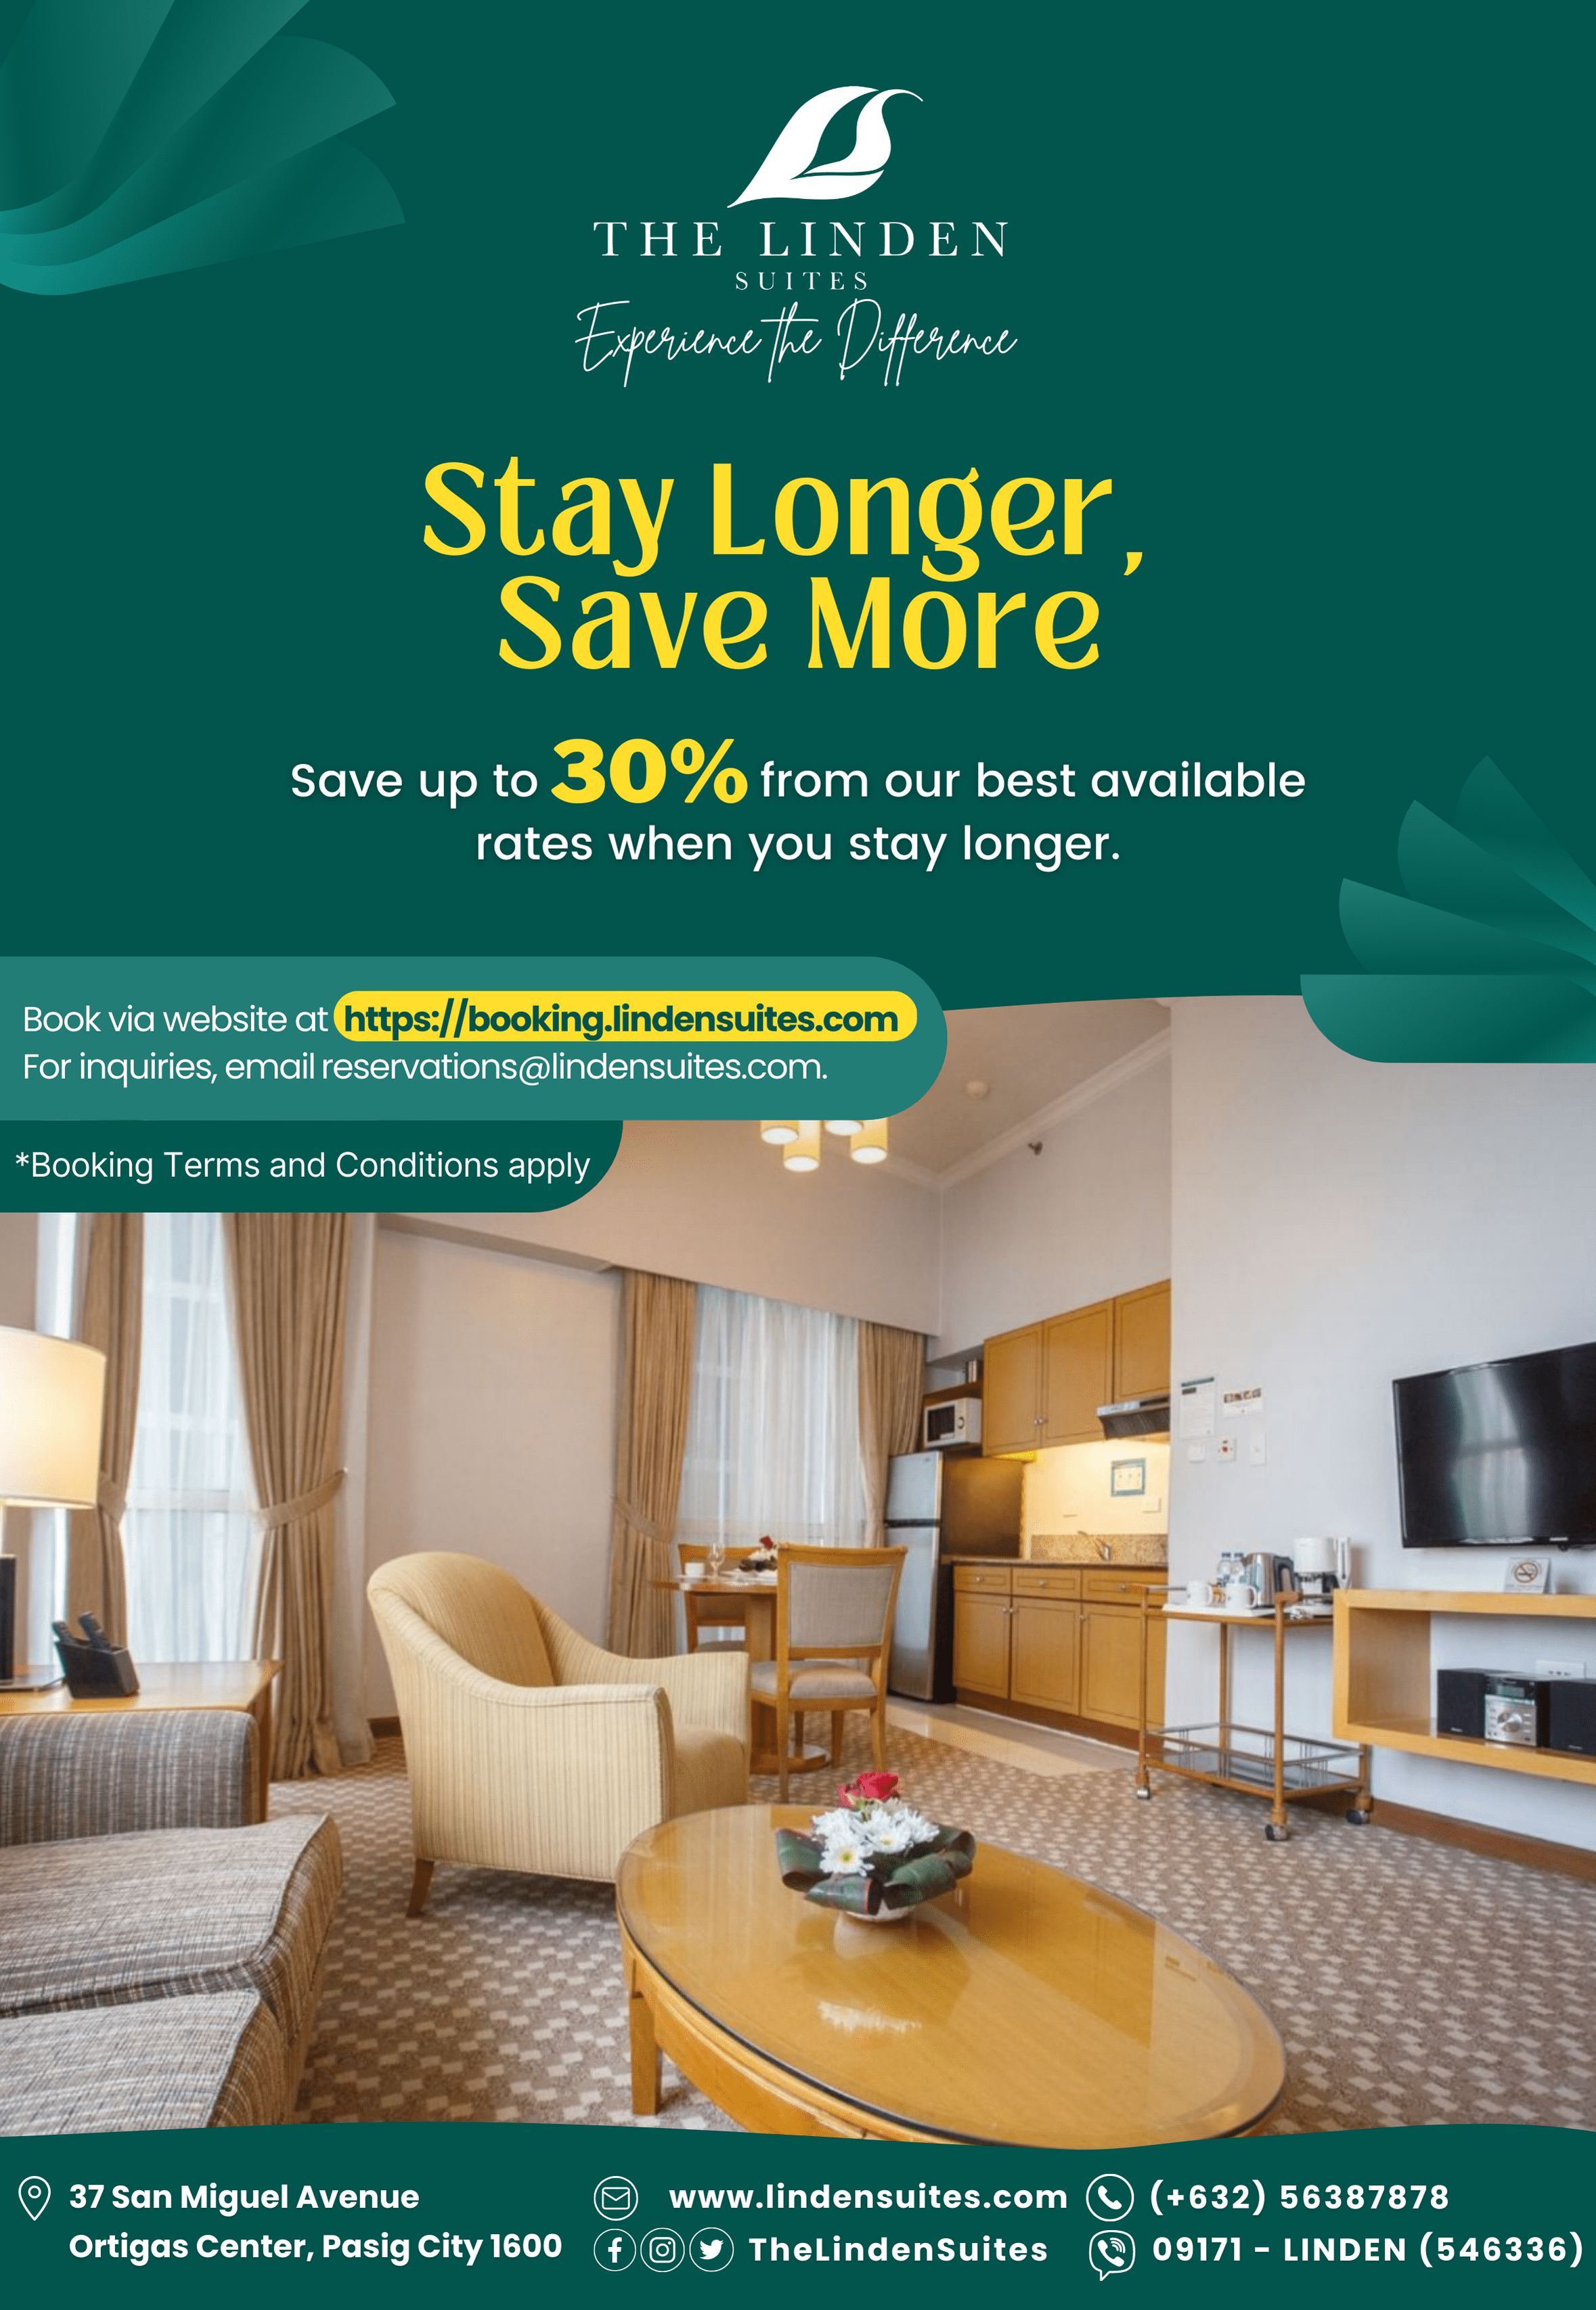 Stay Longer, Save More